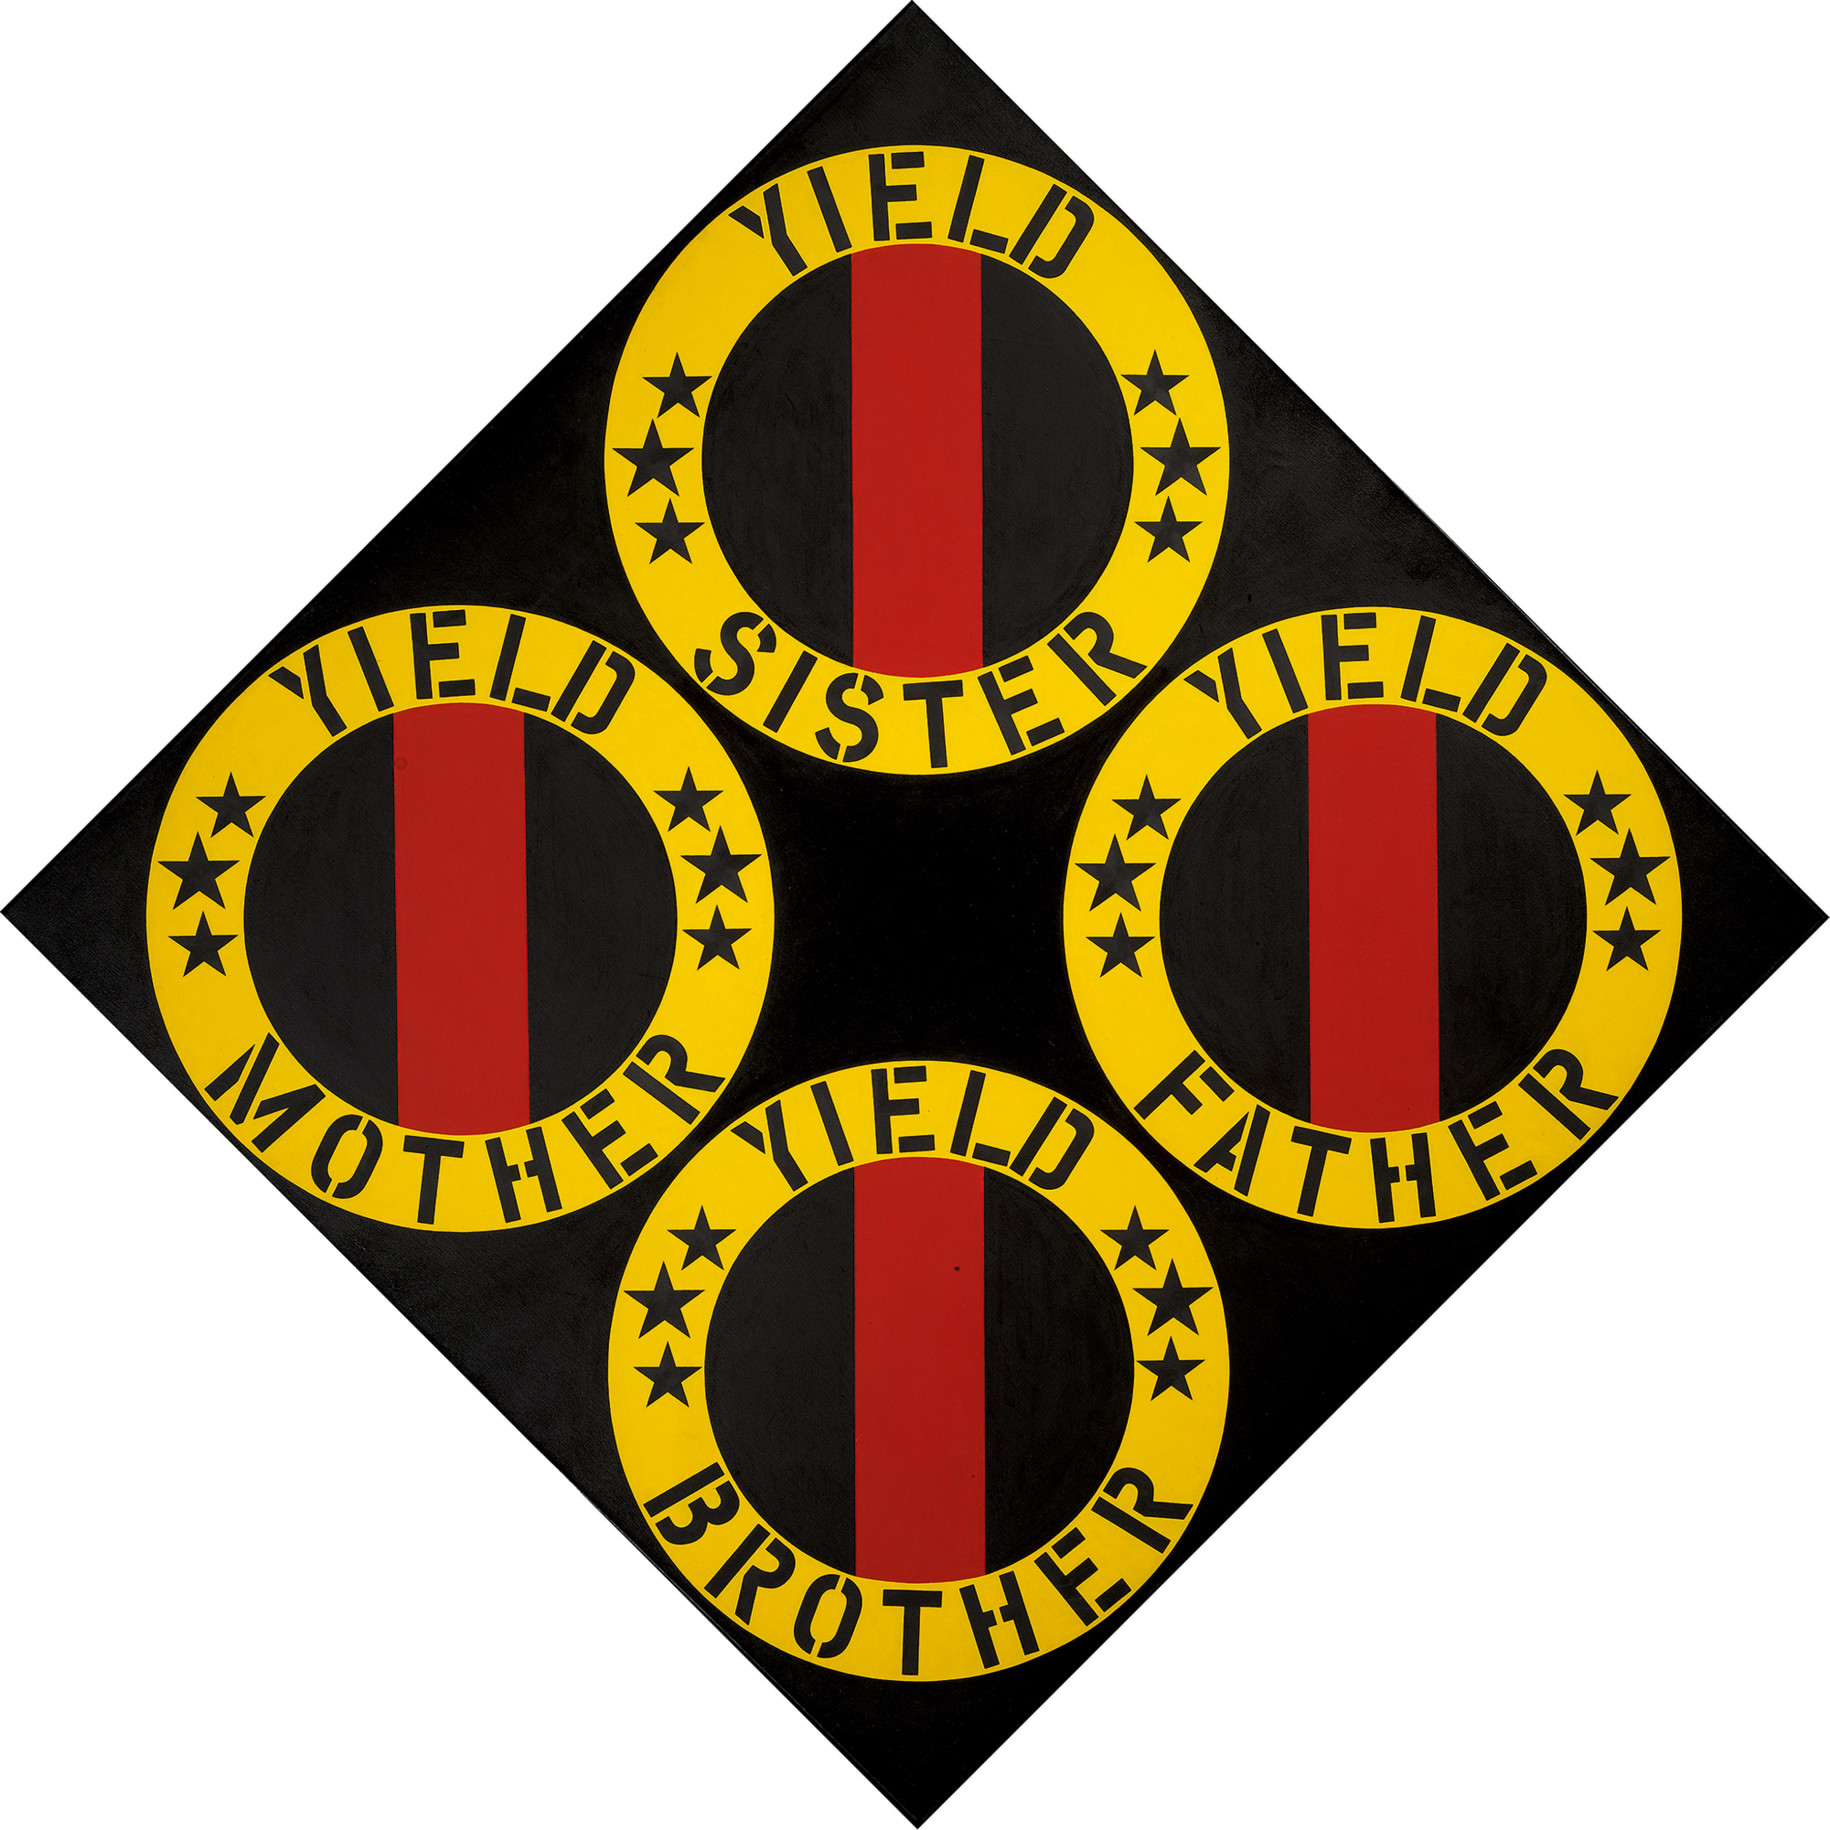 The Black Yield Brother III is an 85 by 85 inch black diamond shaped canvas containing four black circles with a red vertical band surrounded by a yellow ring containing black text and six small black stars. The text in each ring reads, starting a top and going clockwise, &quot;Yield Sister,&quot; &quot;Yield Father,&quot; &quot;Yield Brother,&quot; and &quot;Yield Mother.&quot;